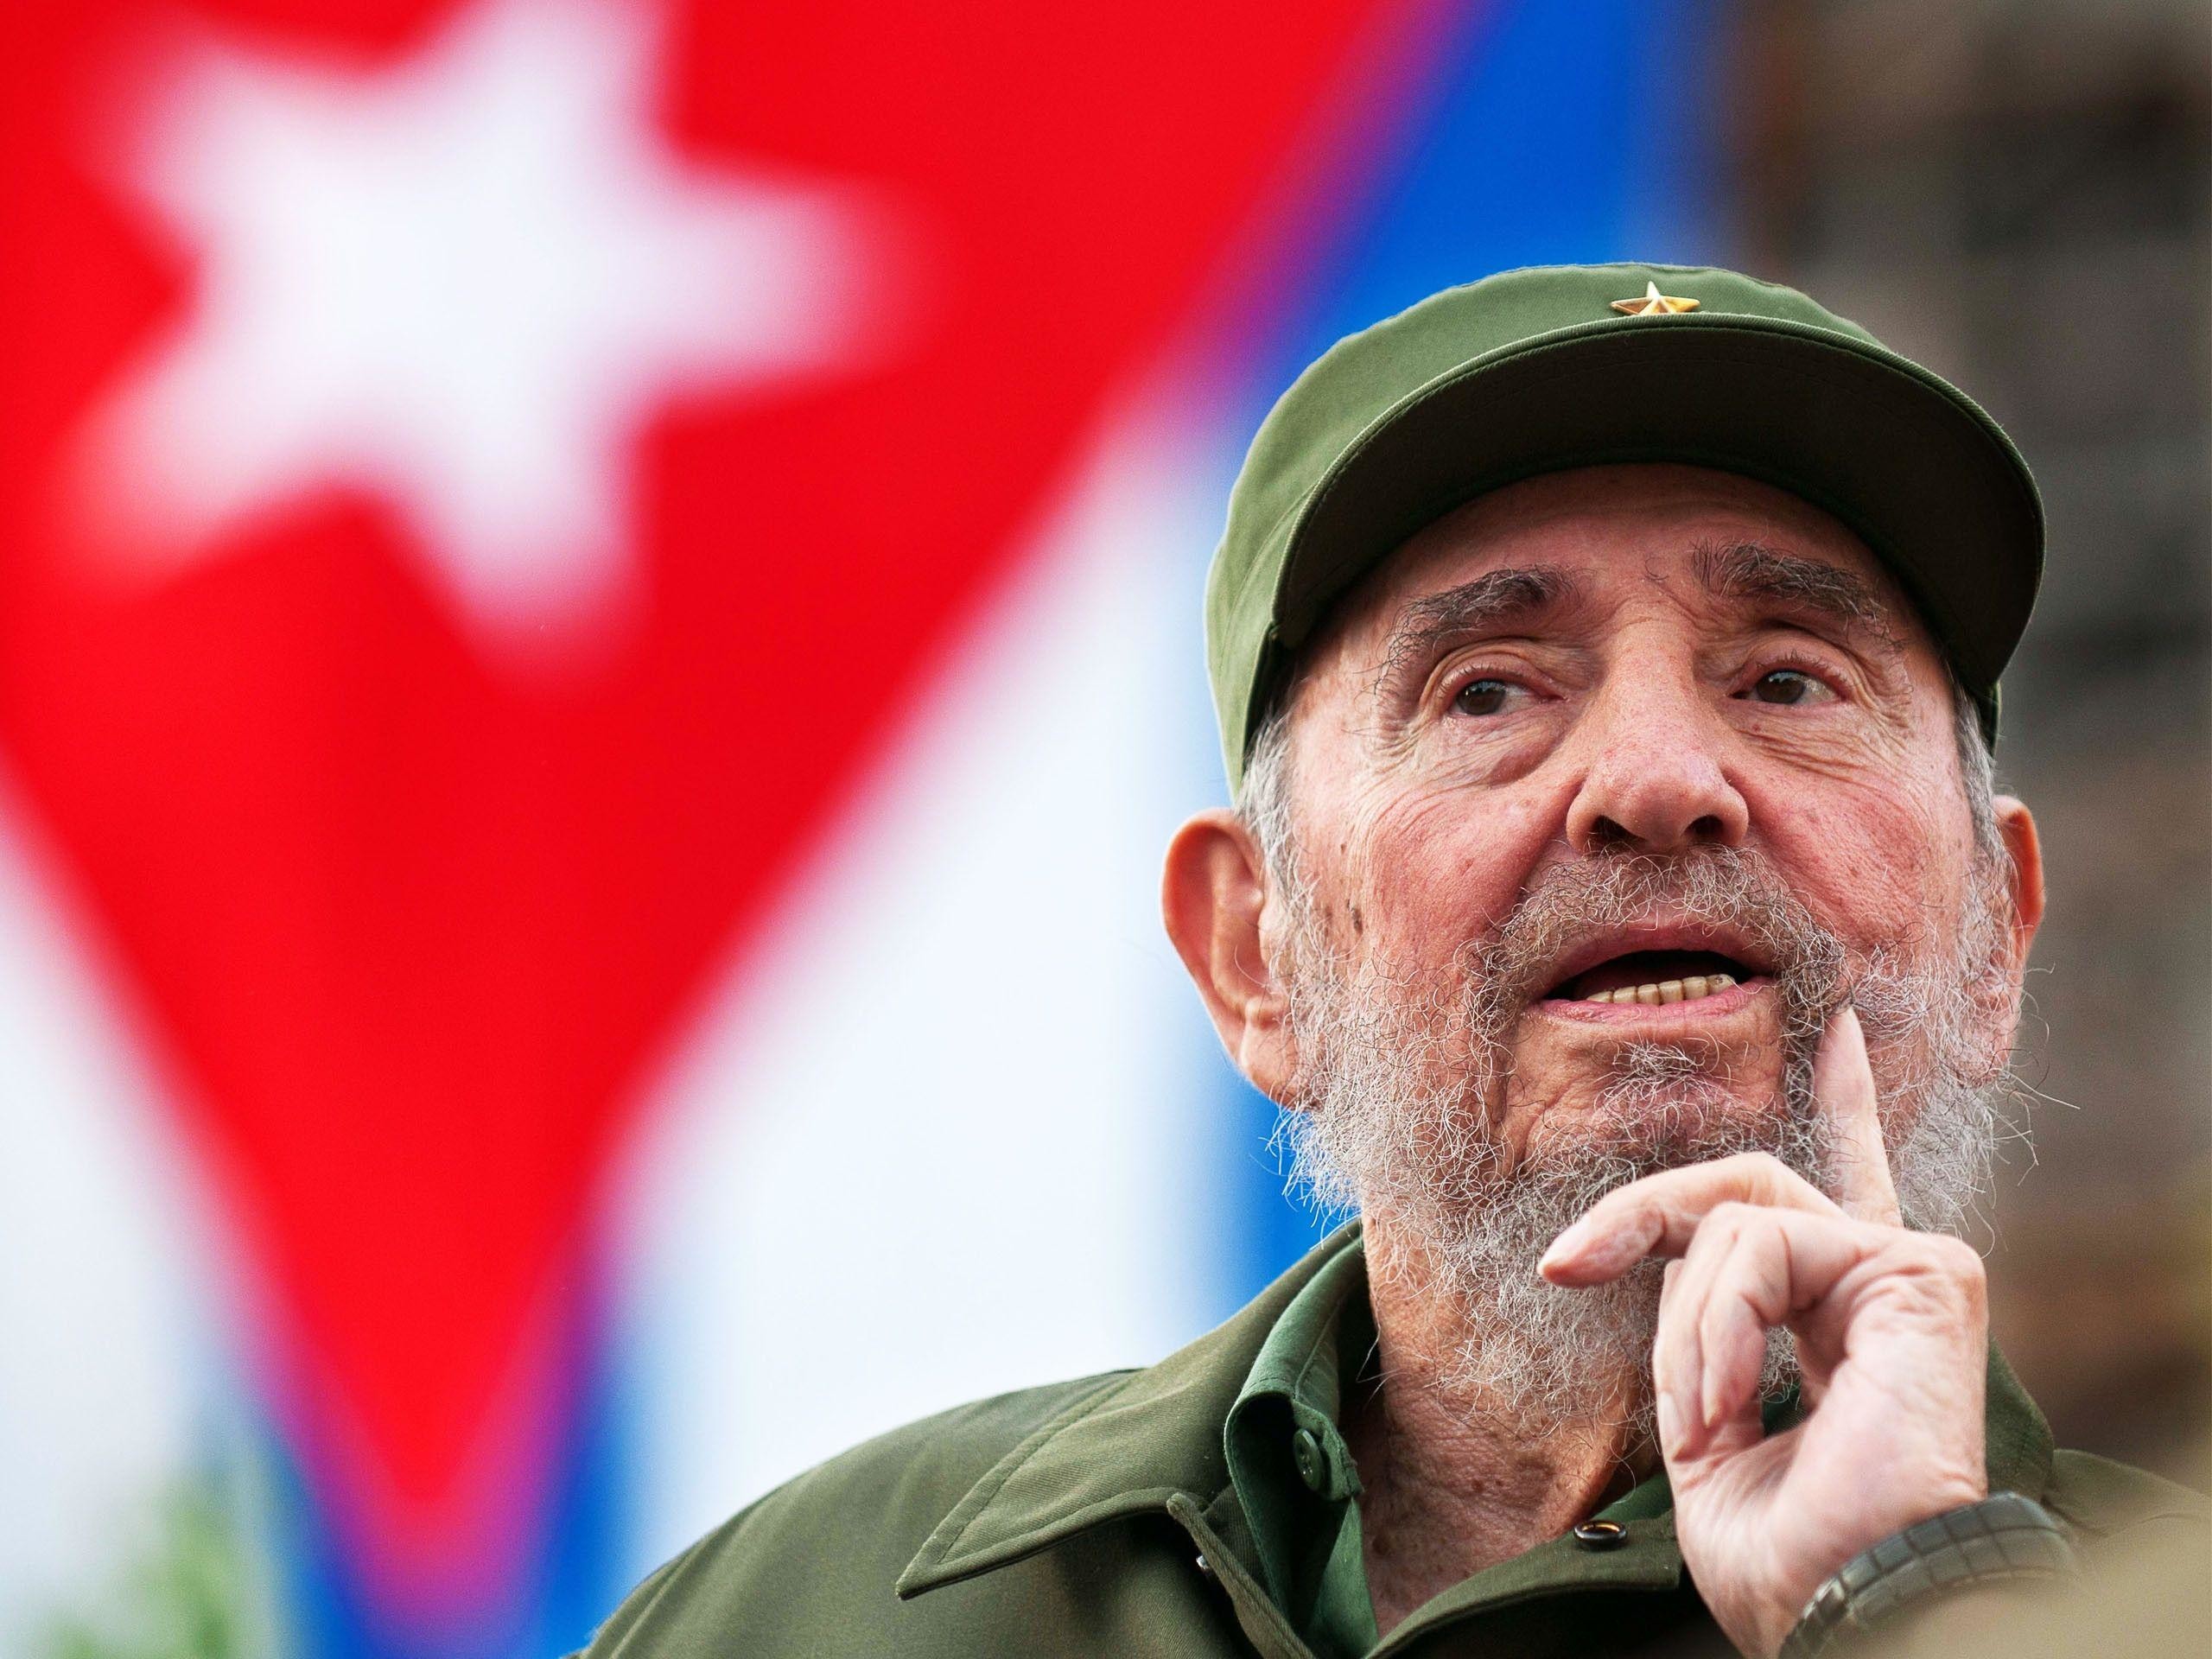 Hd Wallpapers Fidel Castro And Che Guevara 800 X 544 71 Kb Jpeg .